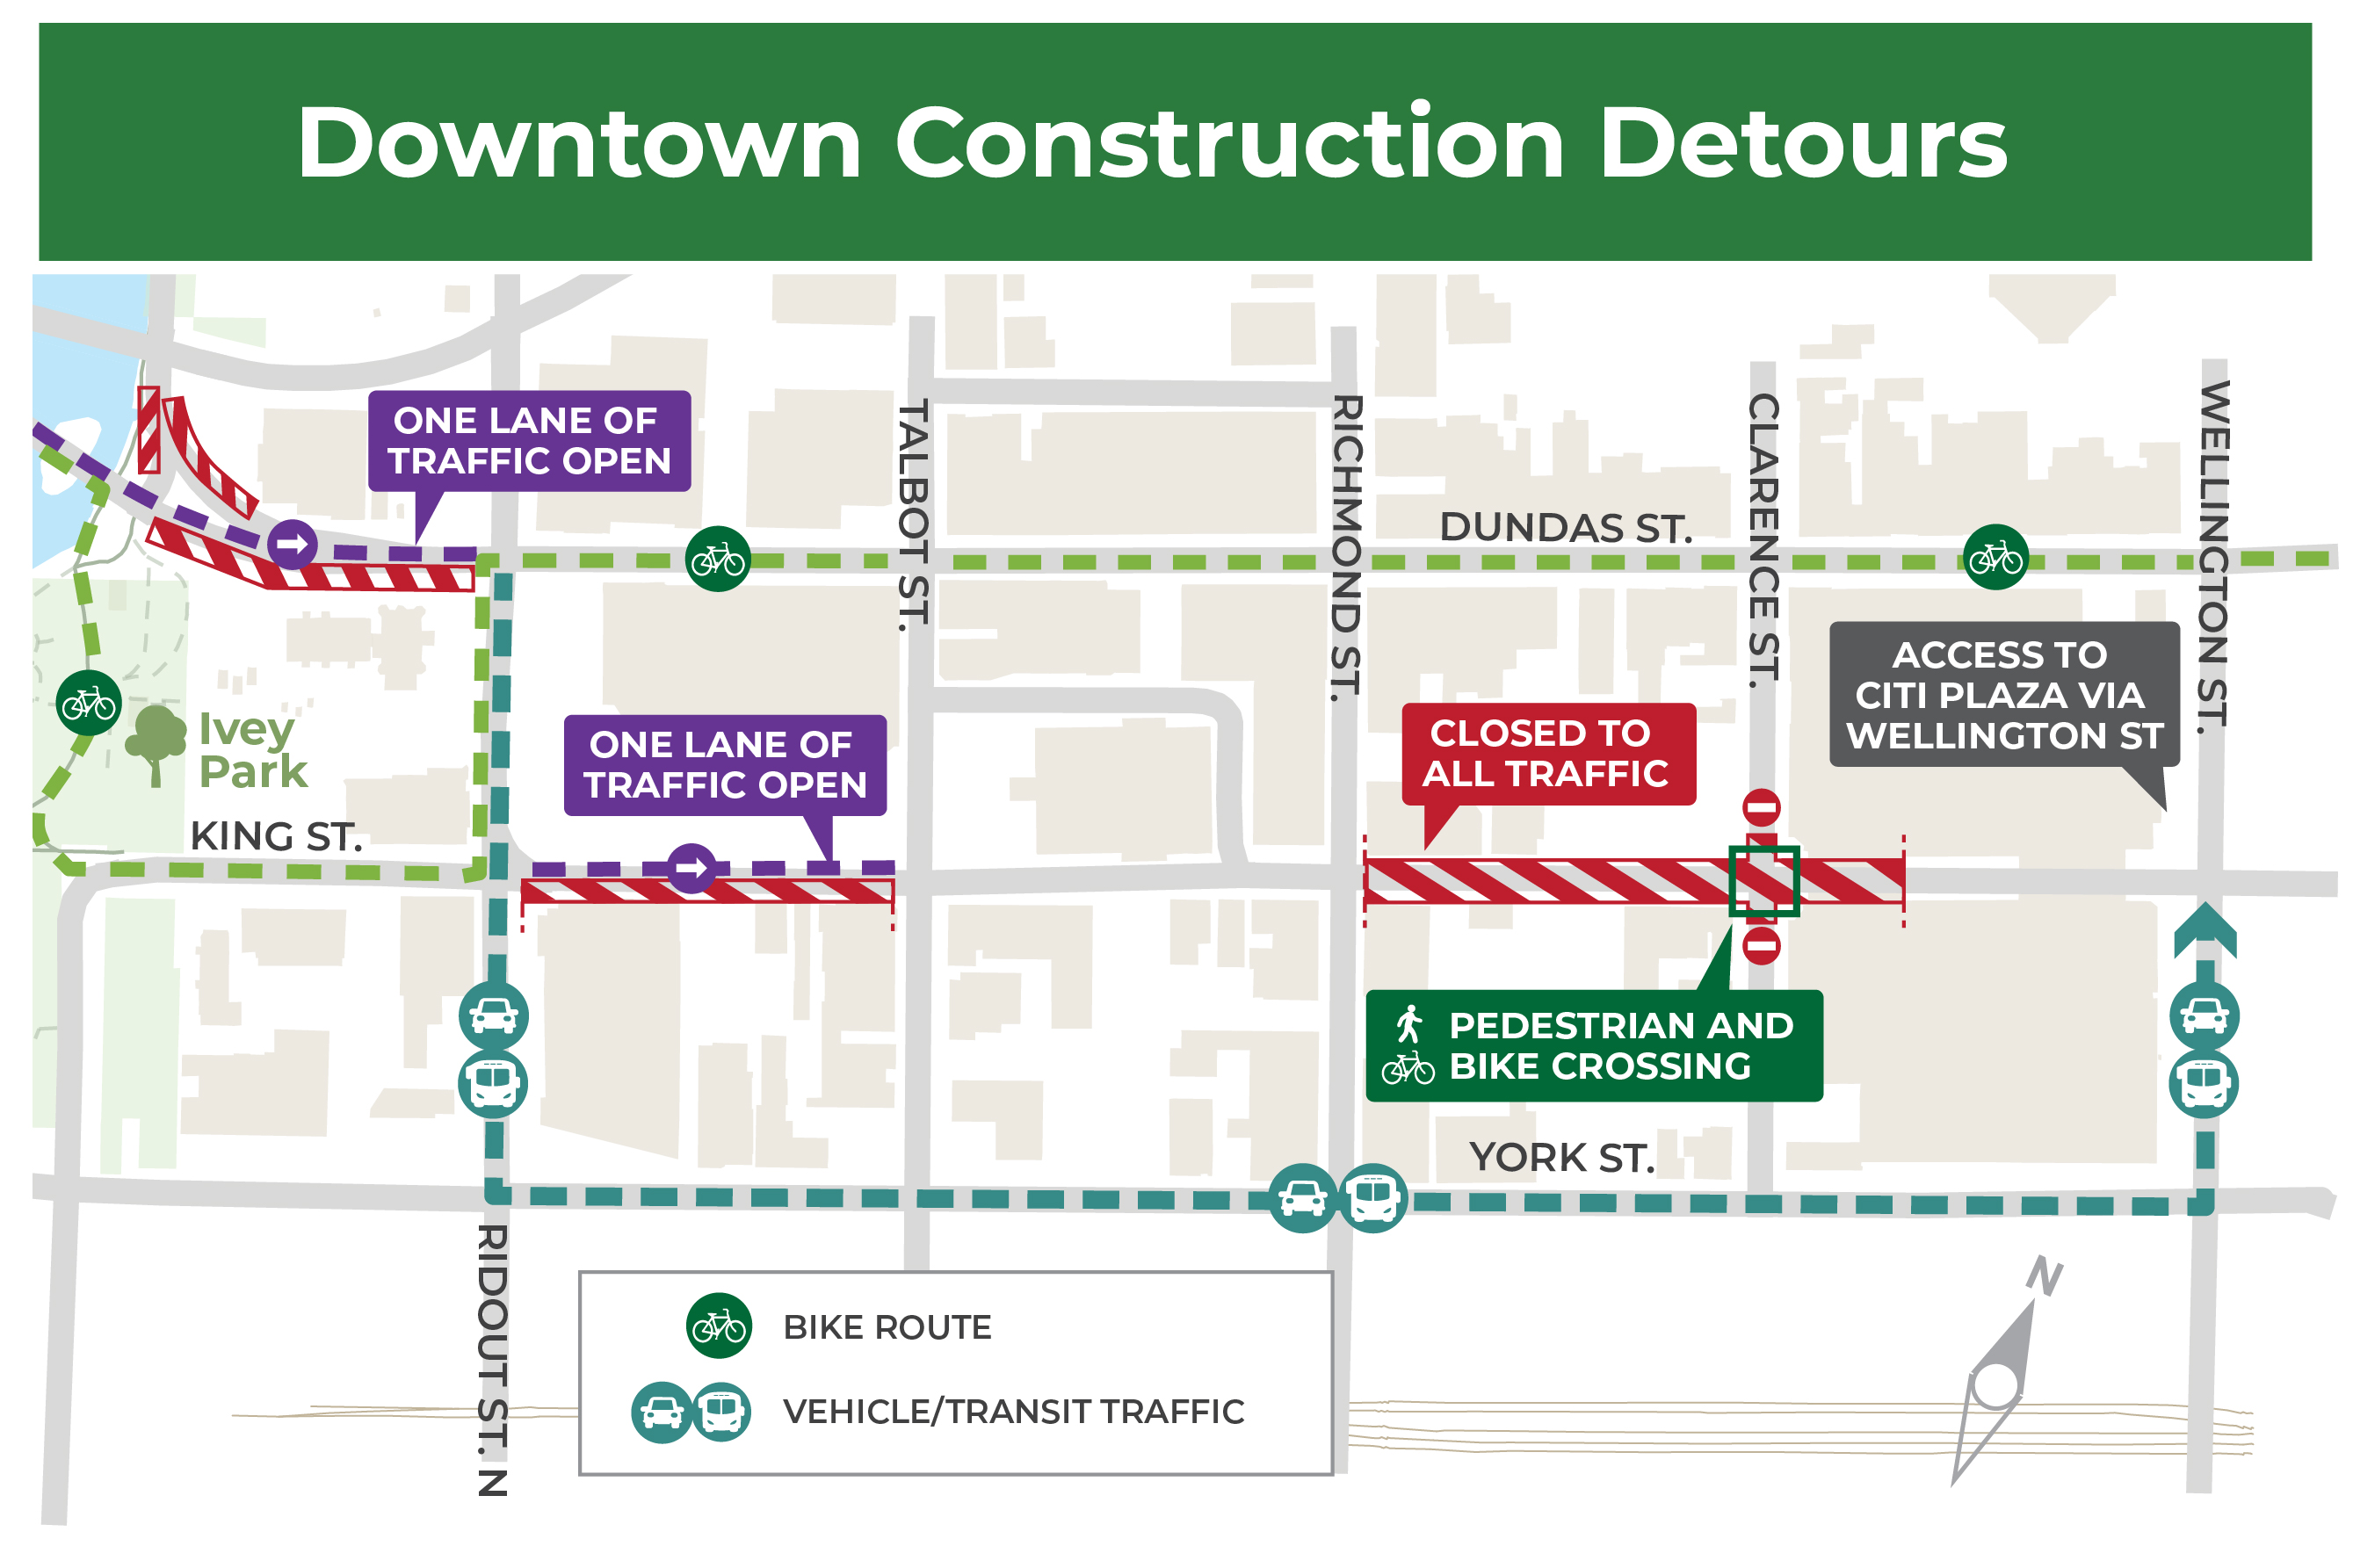 The intersection of King Street and Clarence Street will be closed to traffic beginning August 9. 